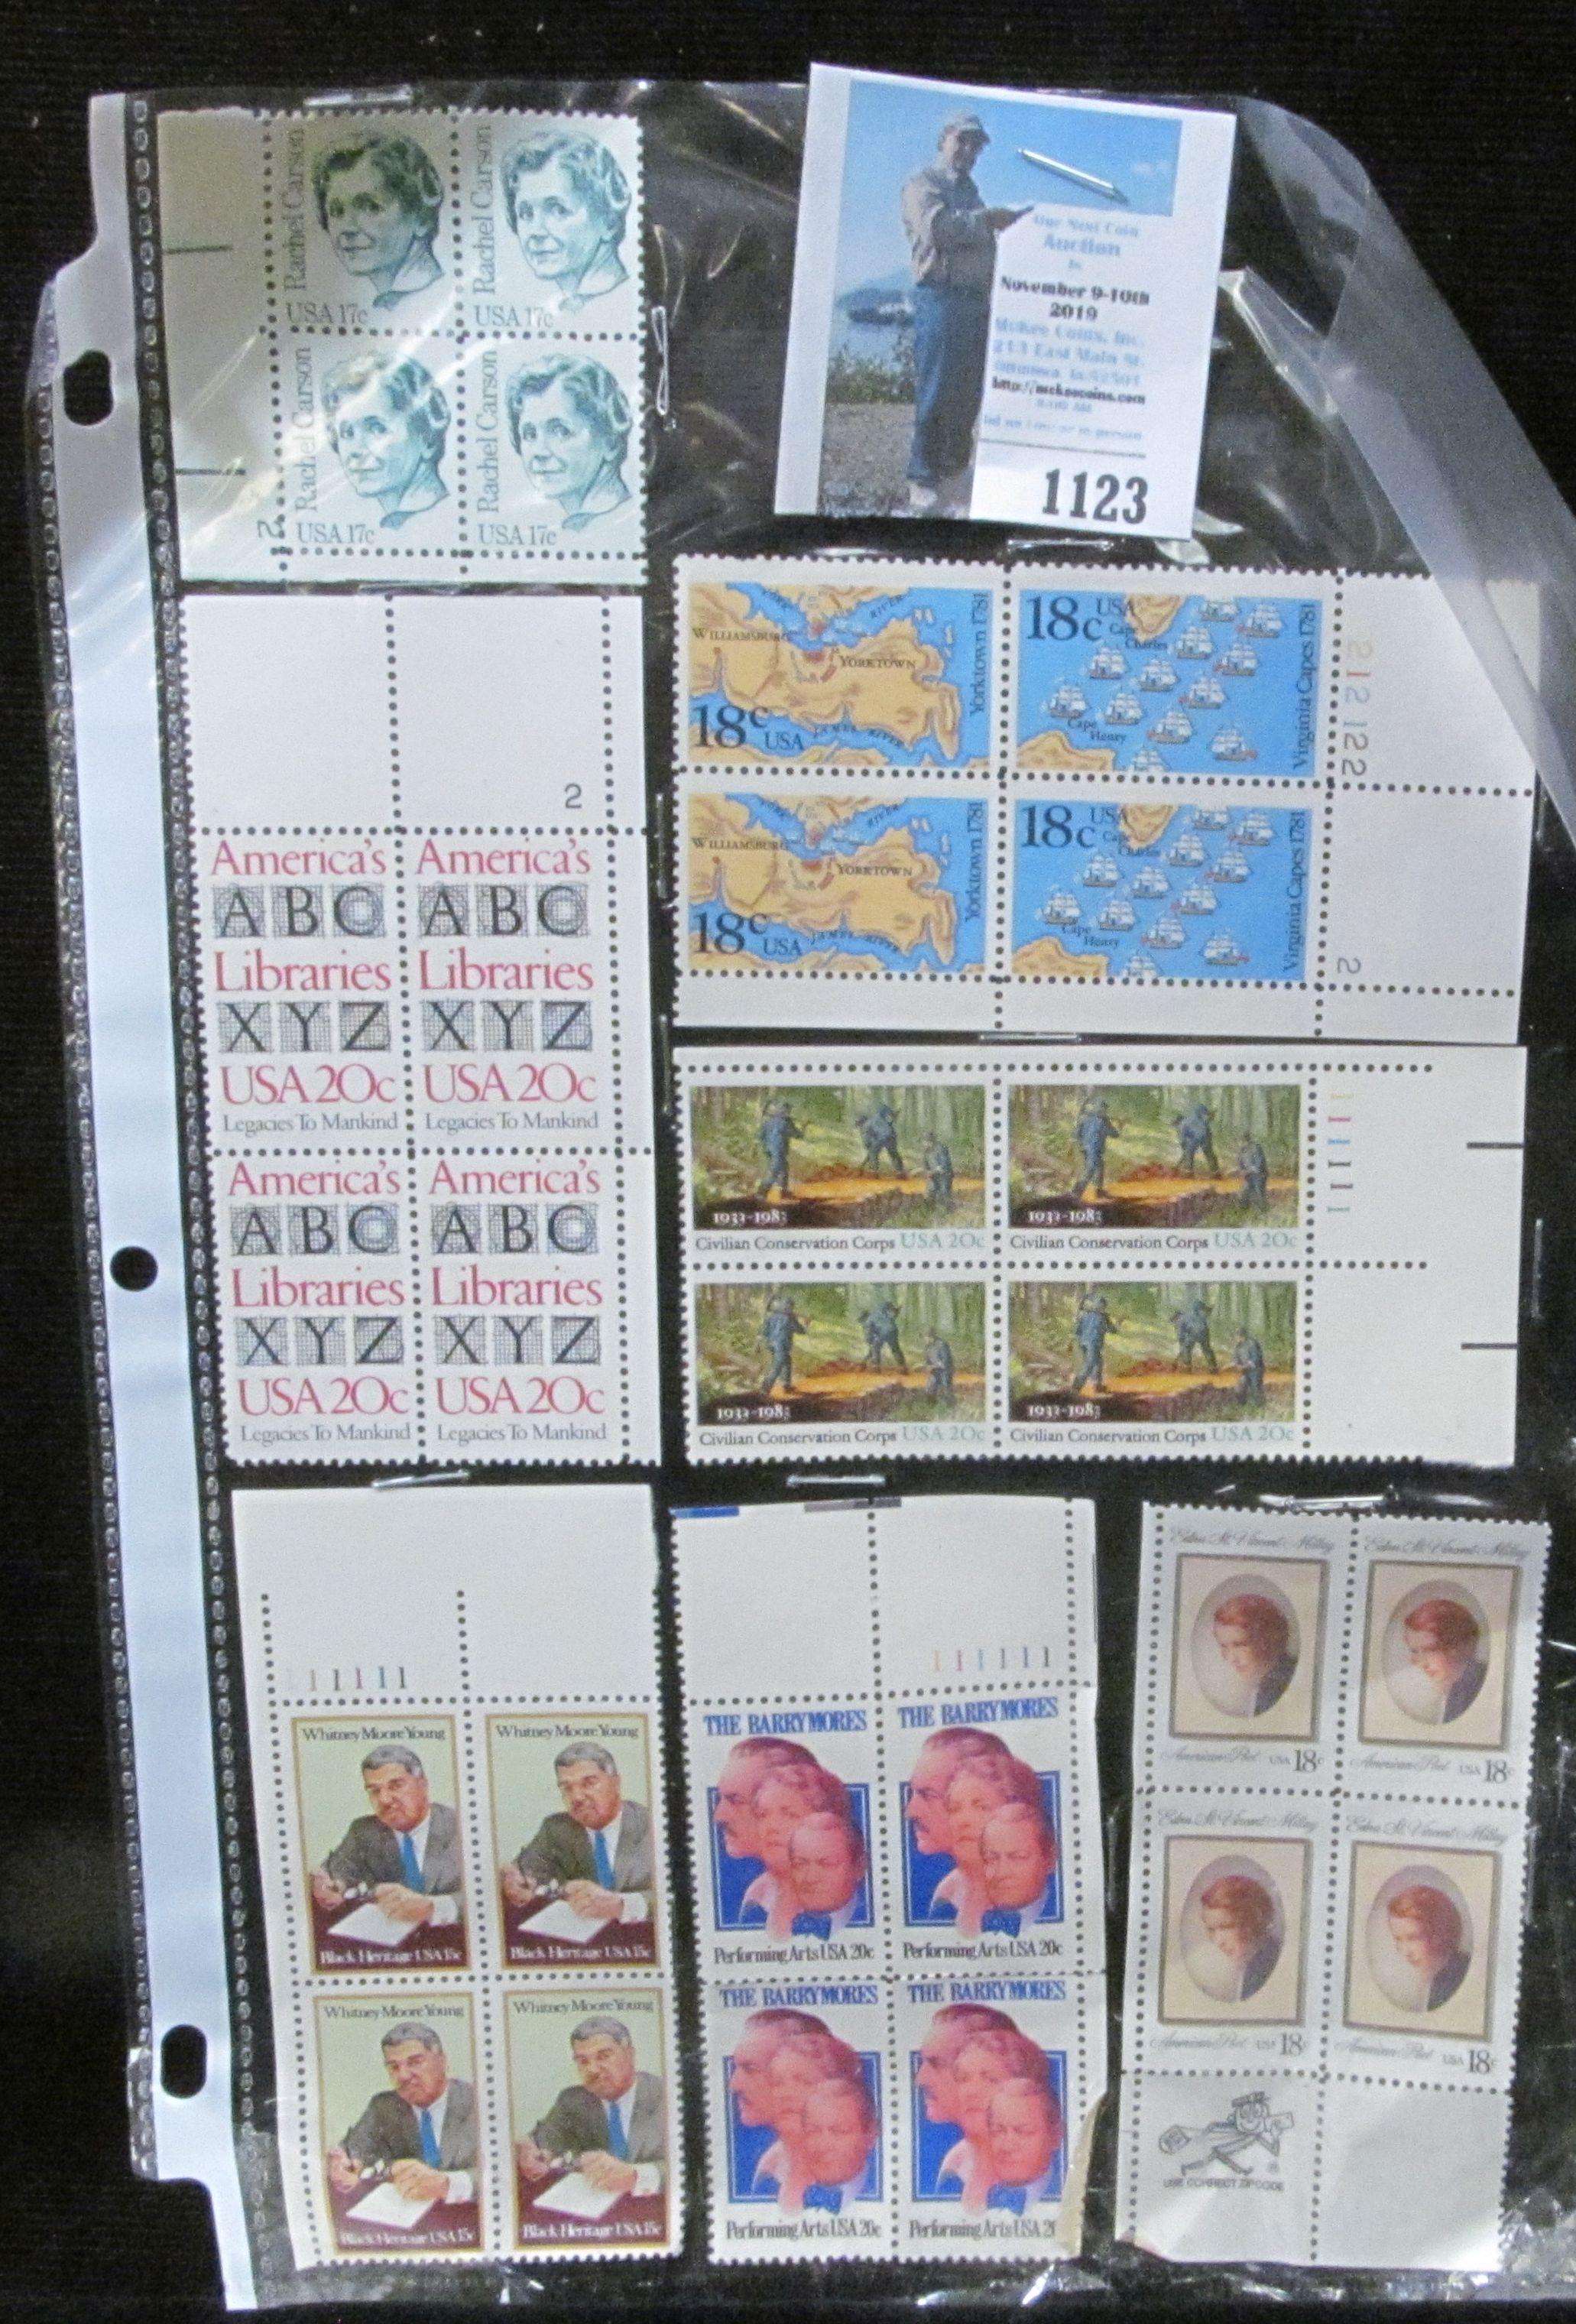 (7) Mint Blocks of Stamps with a face value of $5.12.